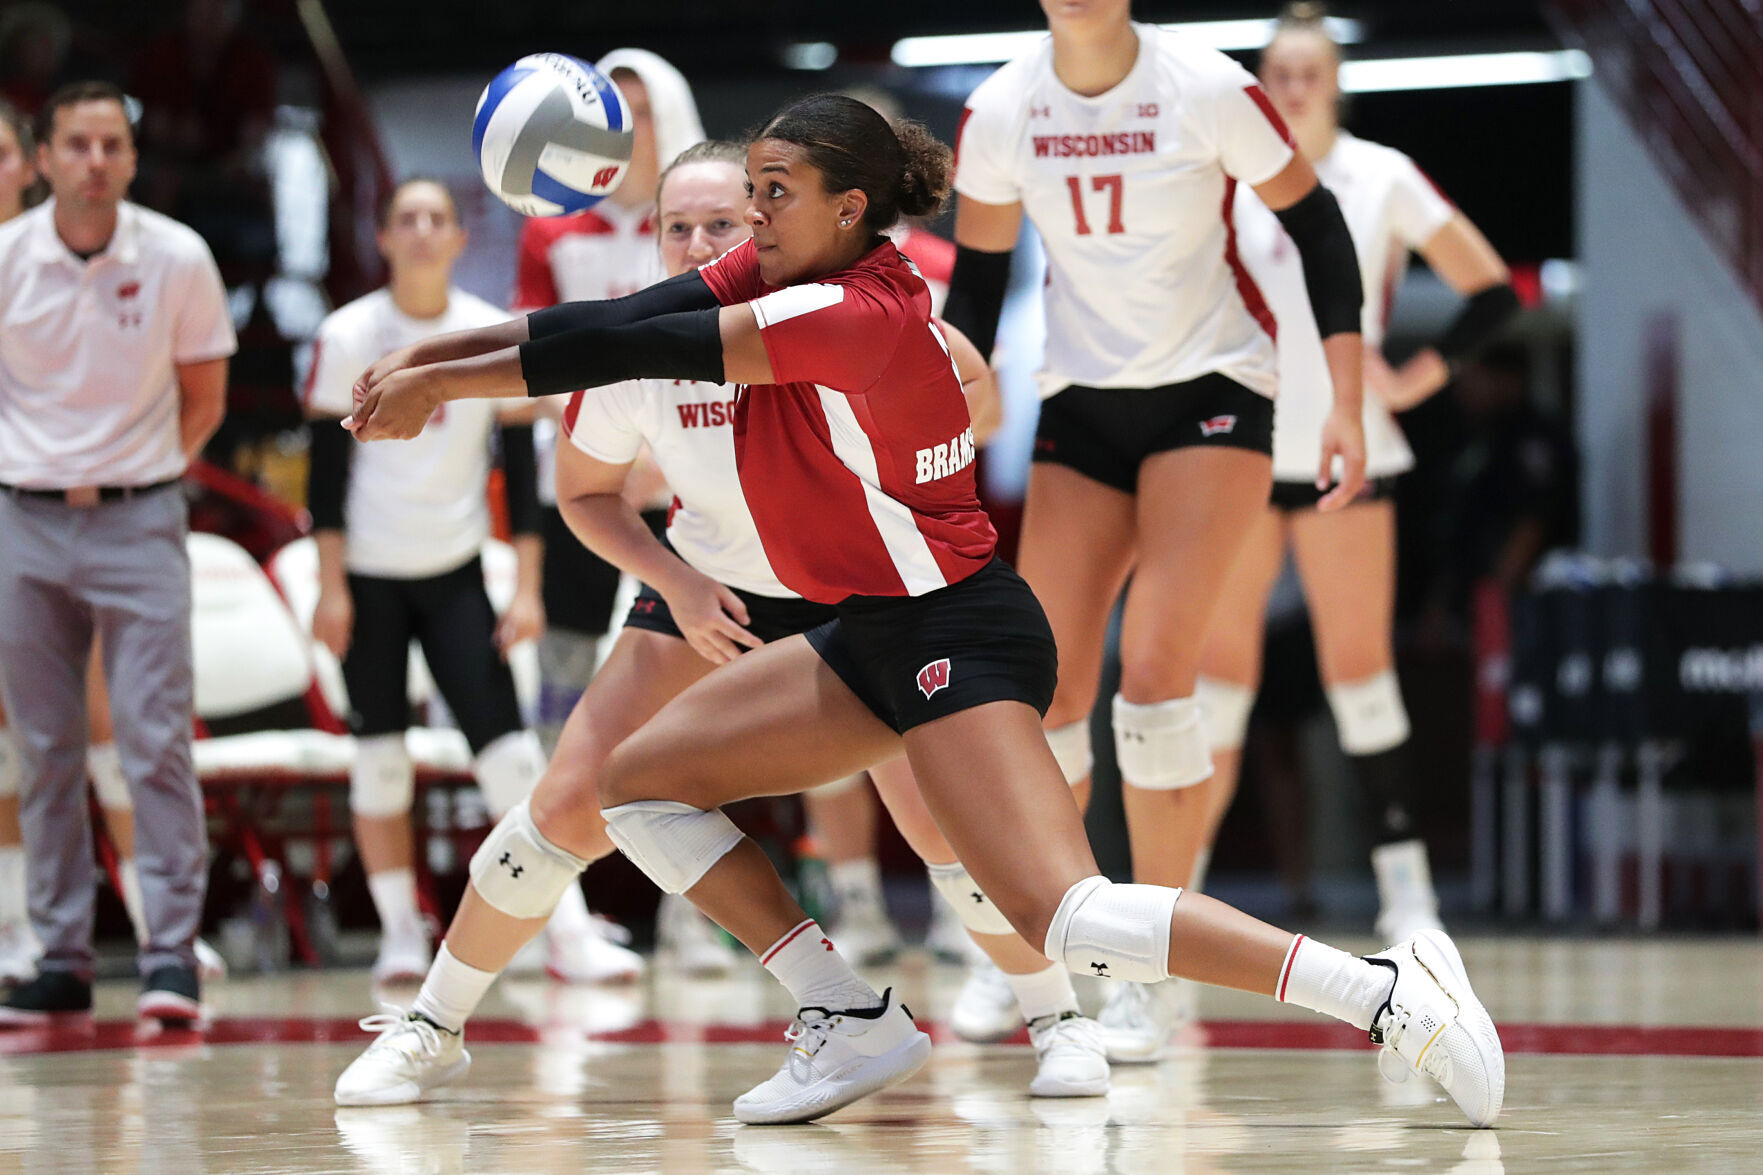 NCAA forces Wisconsin volleyball transfer to sit for half of season